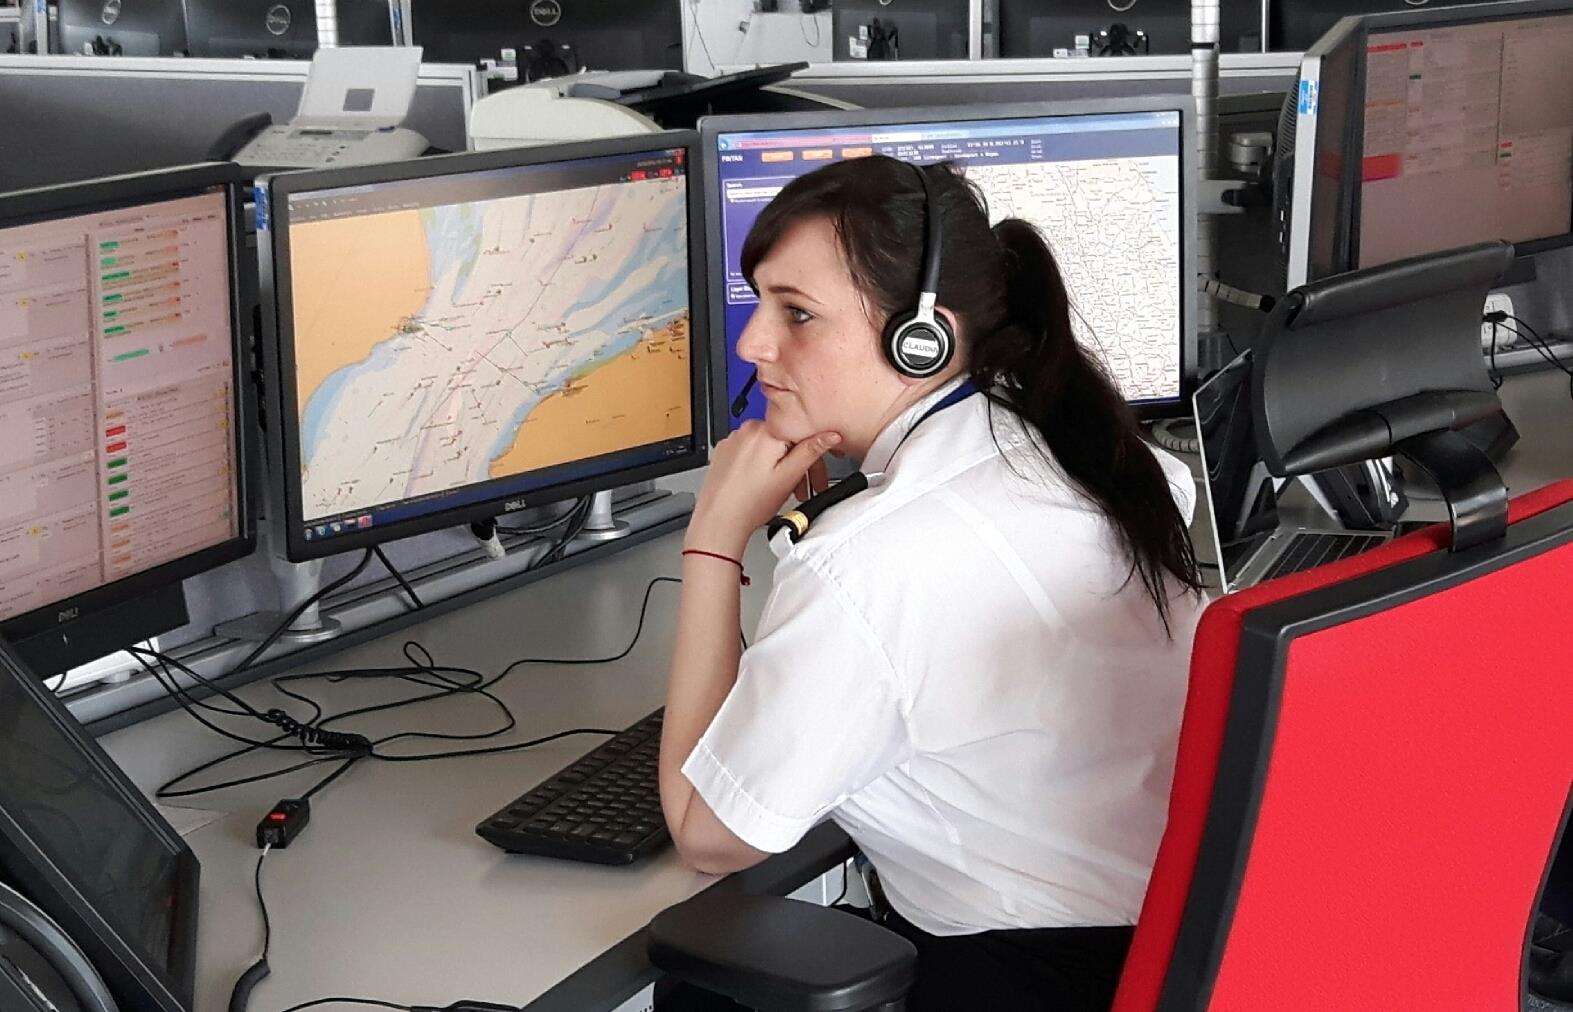 A coastguard worker monitoring screens for emergency alerts